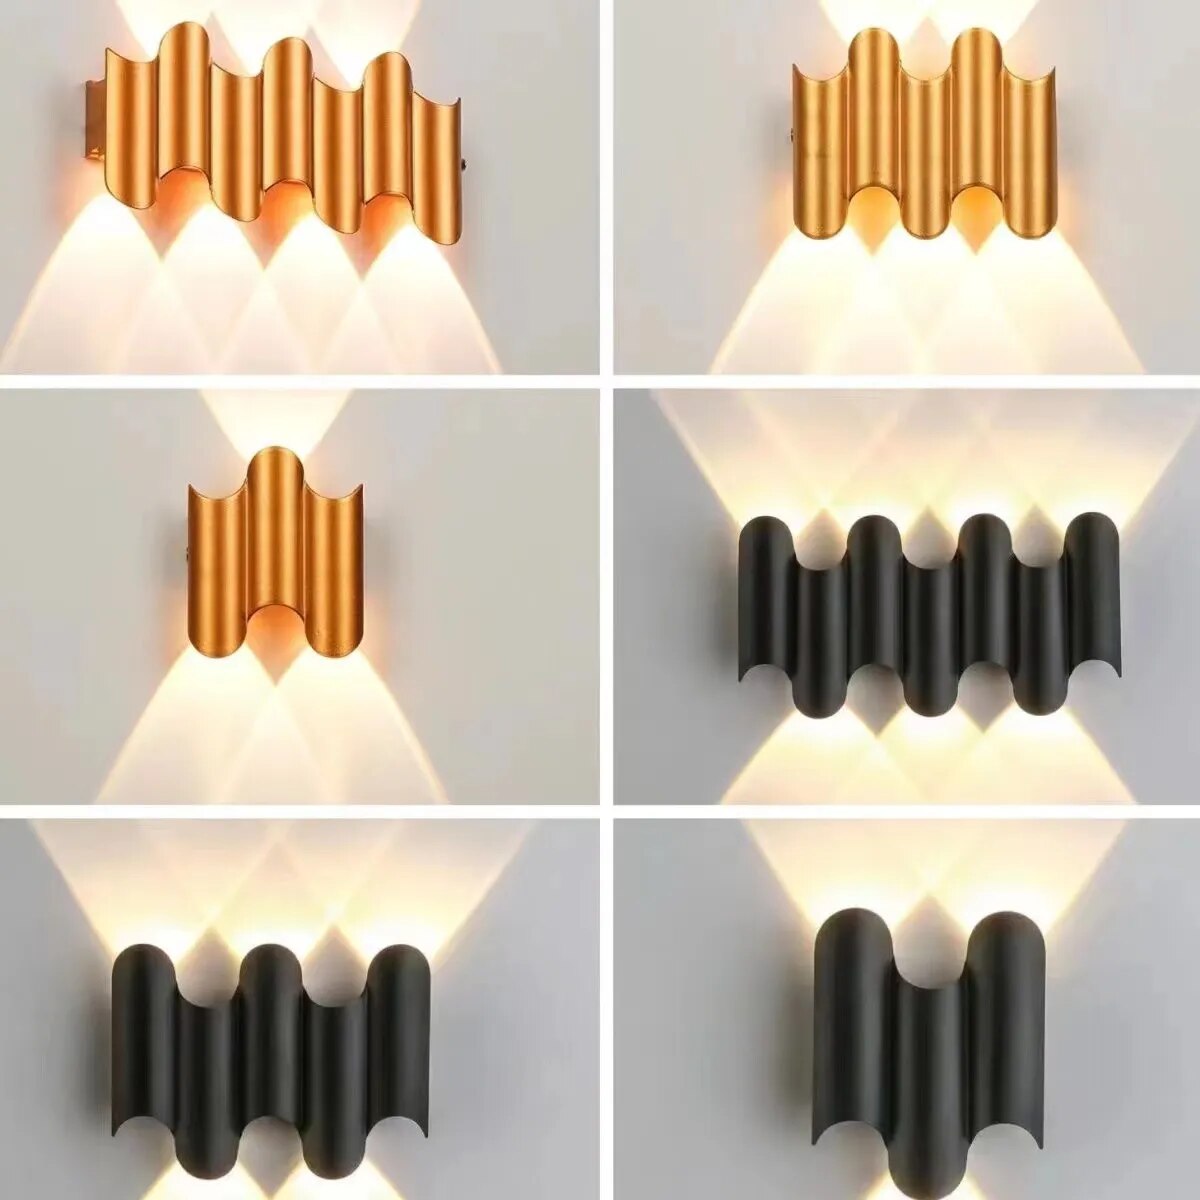 New arrived Led Wall Lamp Indoor Stair Light Fixture Bedside Loft Living Room Up Down Home Hallway Lampada 3W 5W 7W Wall Sconces